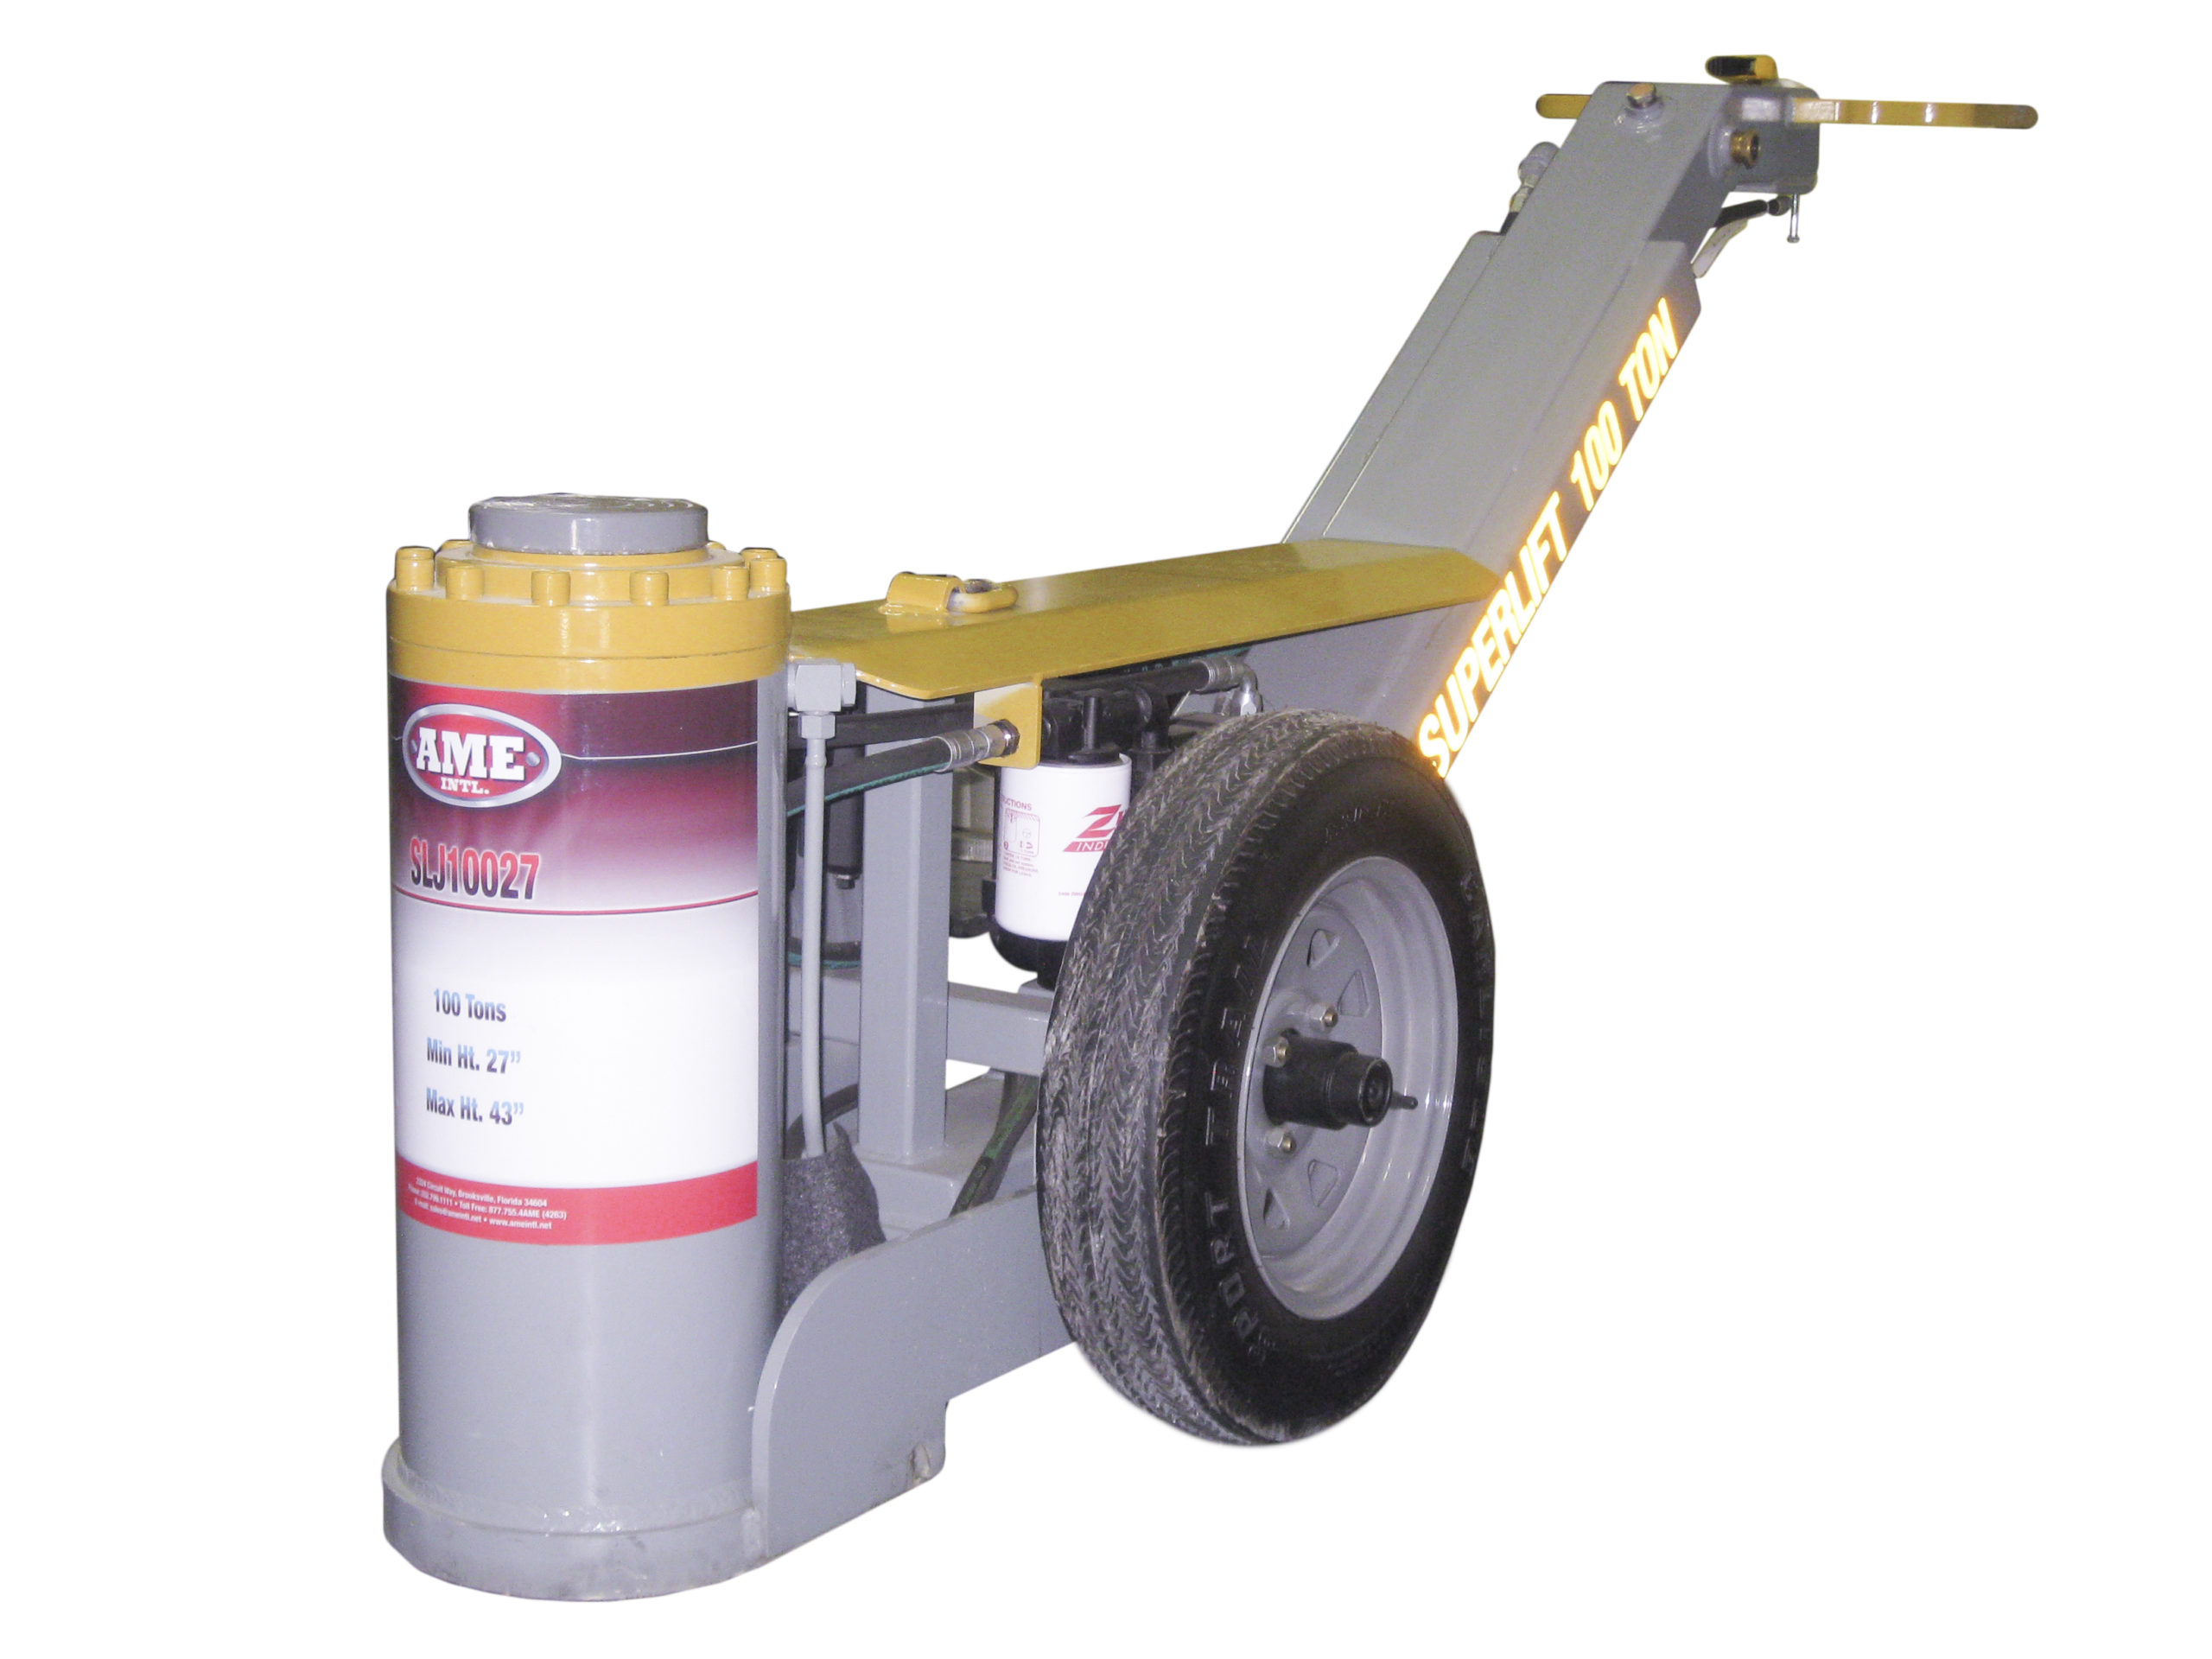 Superlift Jack, 100 Ton Capacity, Min Height 27 Inch, Max Height 43 Inch